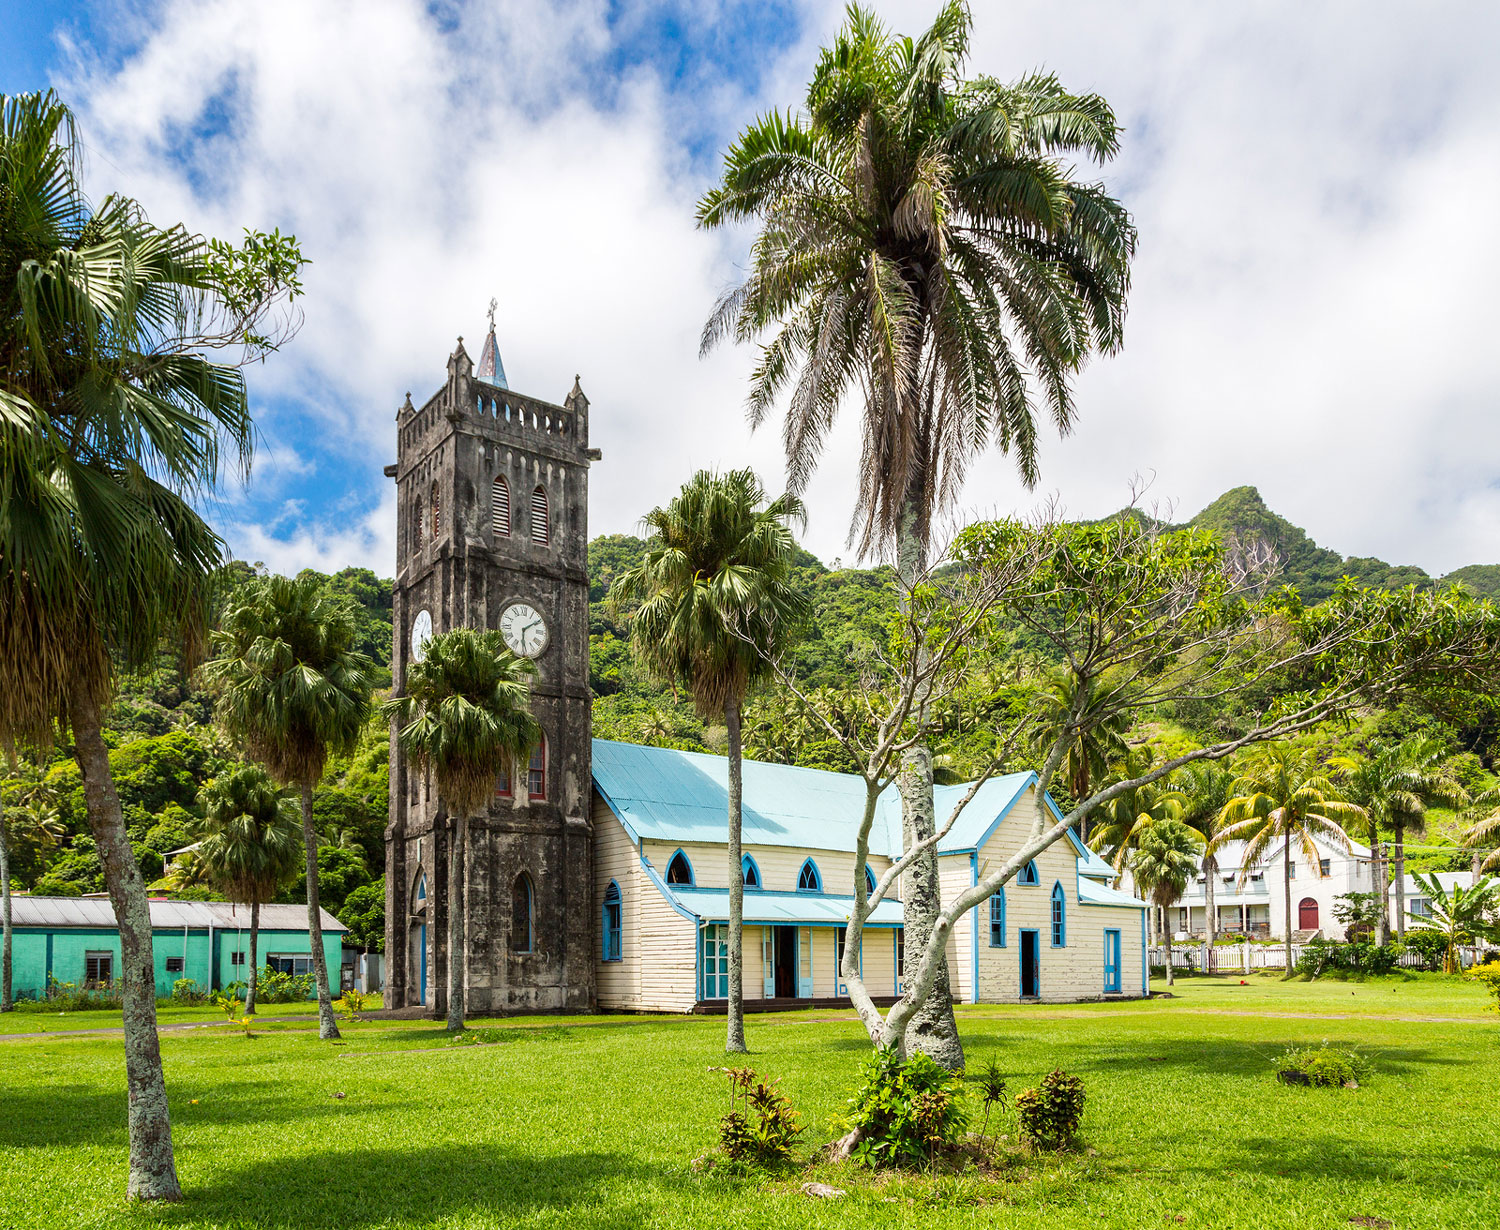 Sacred Heart Roman Catholic Church with a Clock tower in the colorful, vibrant old colonial capital of Fiji.